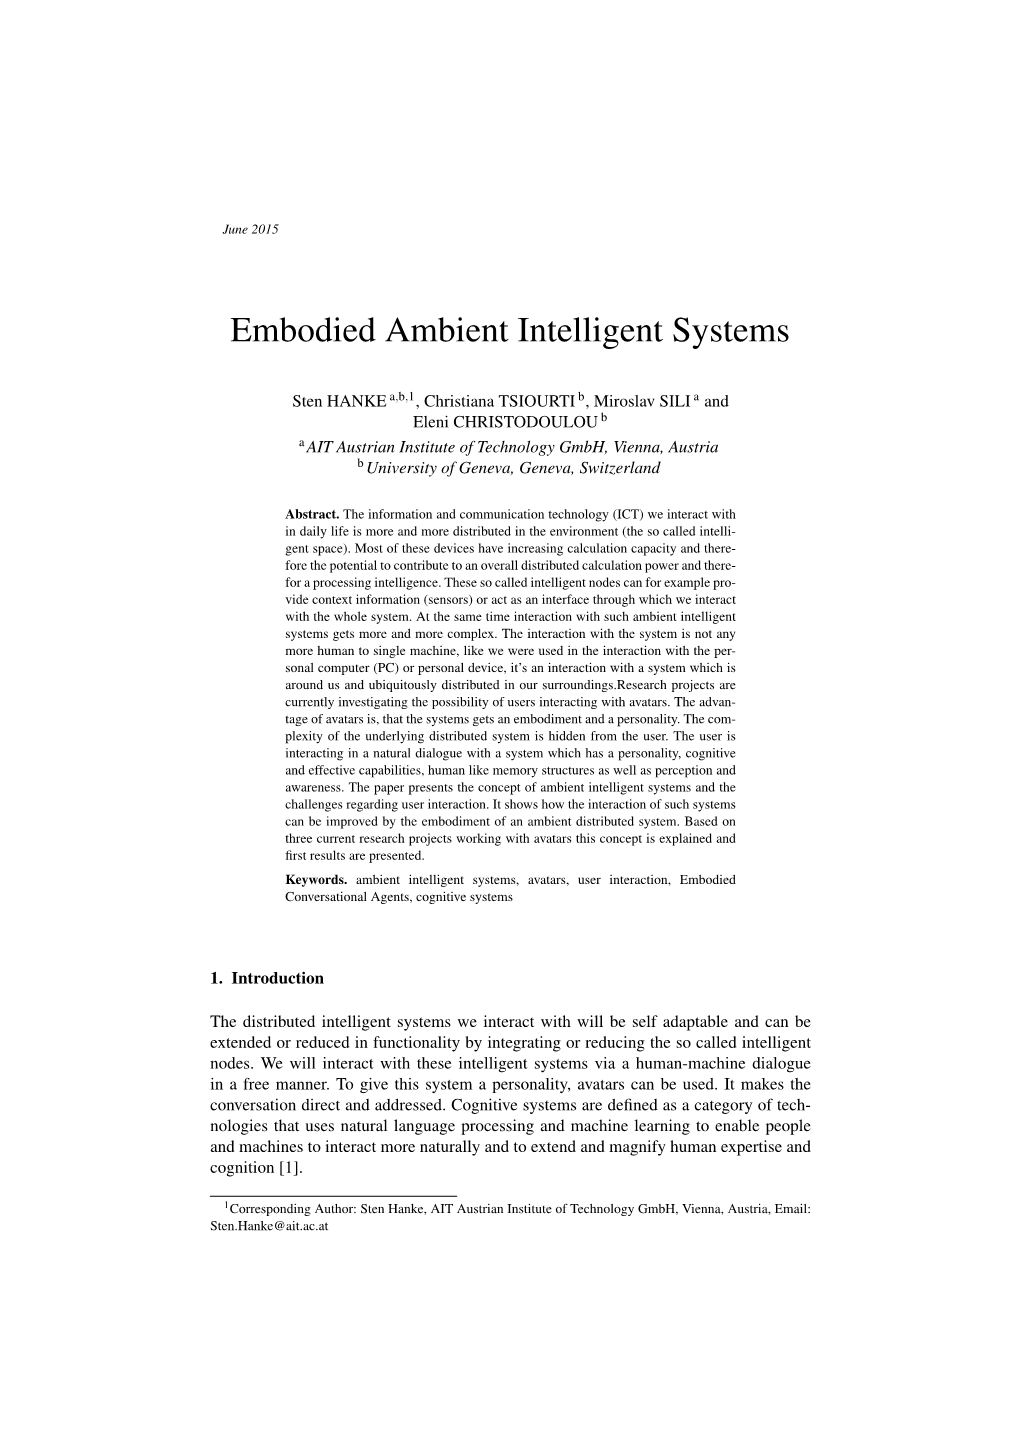 Embodied Ambient Intelligent Systems